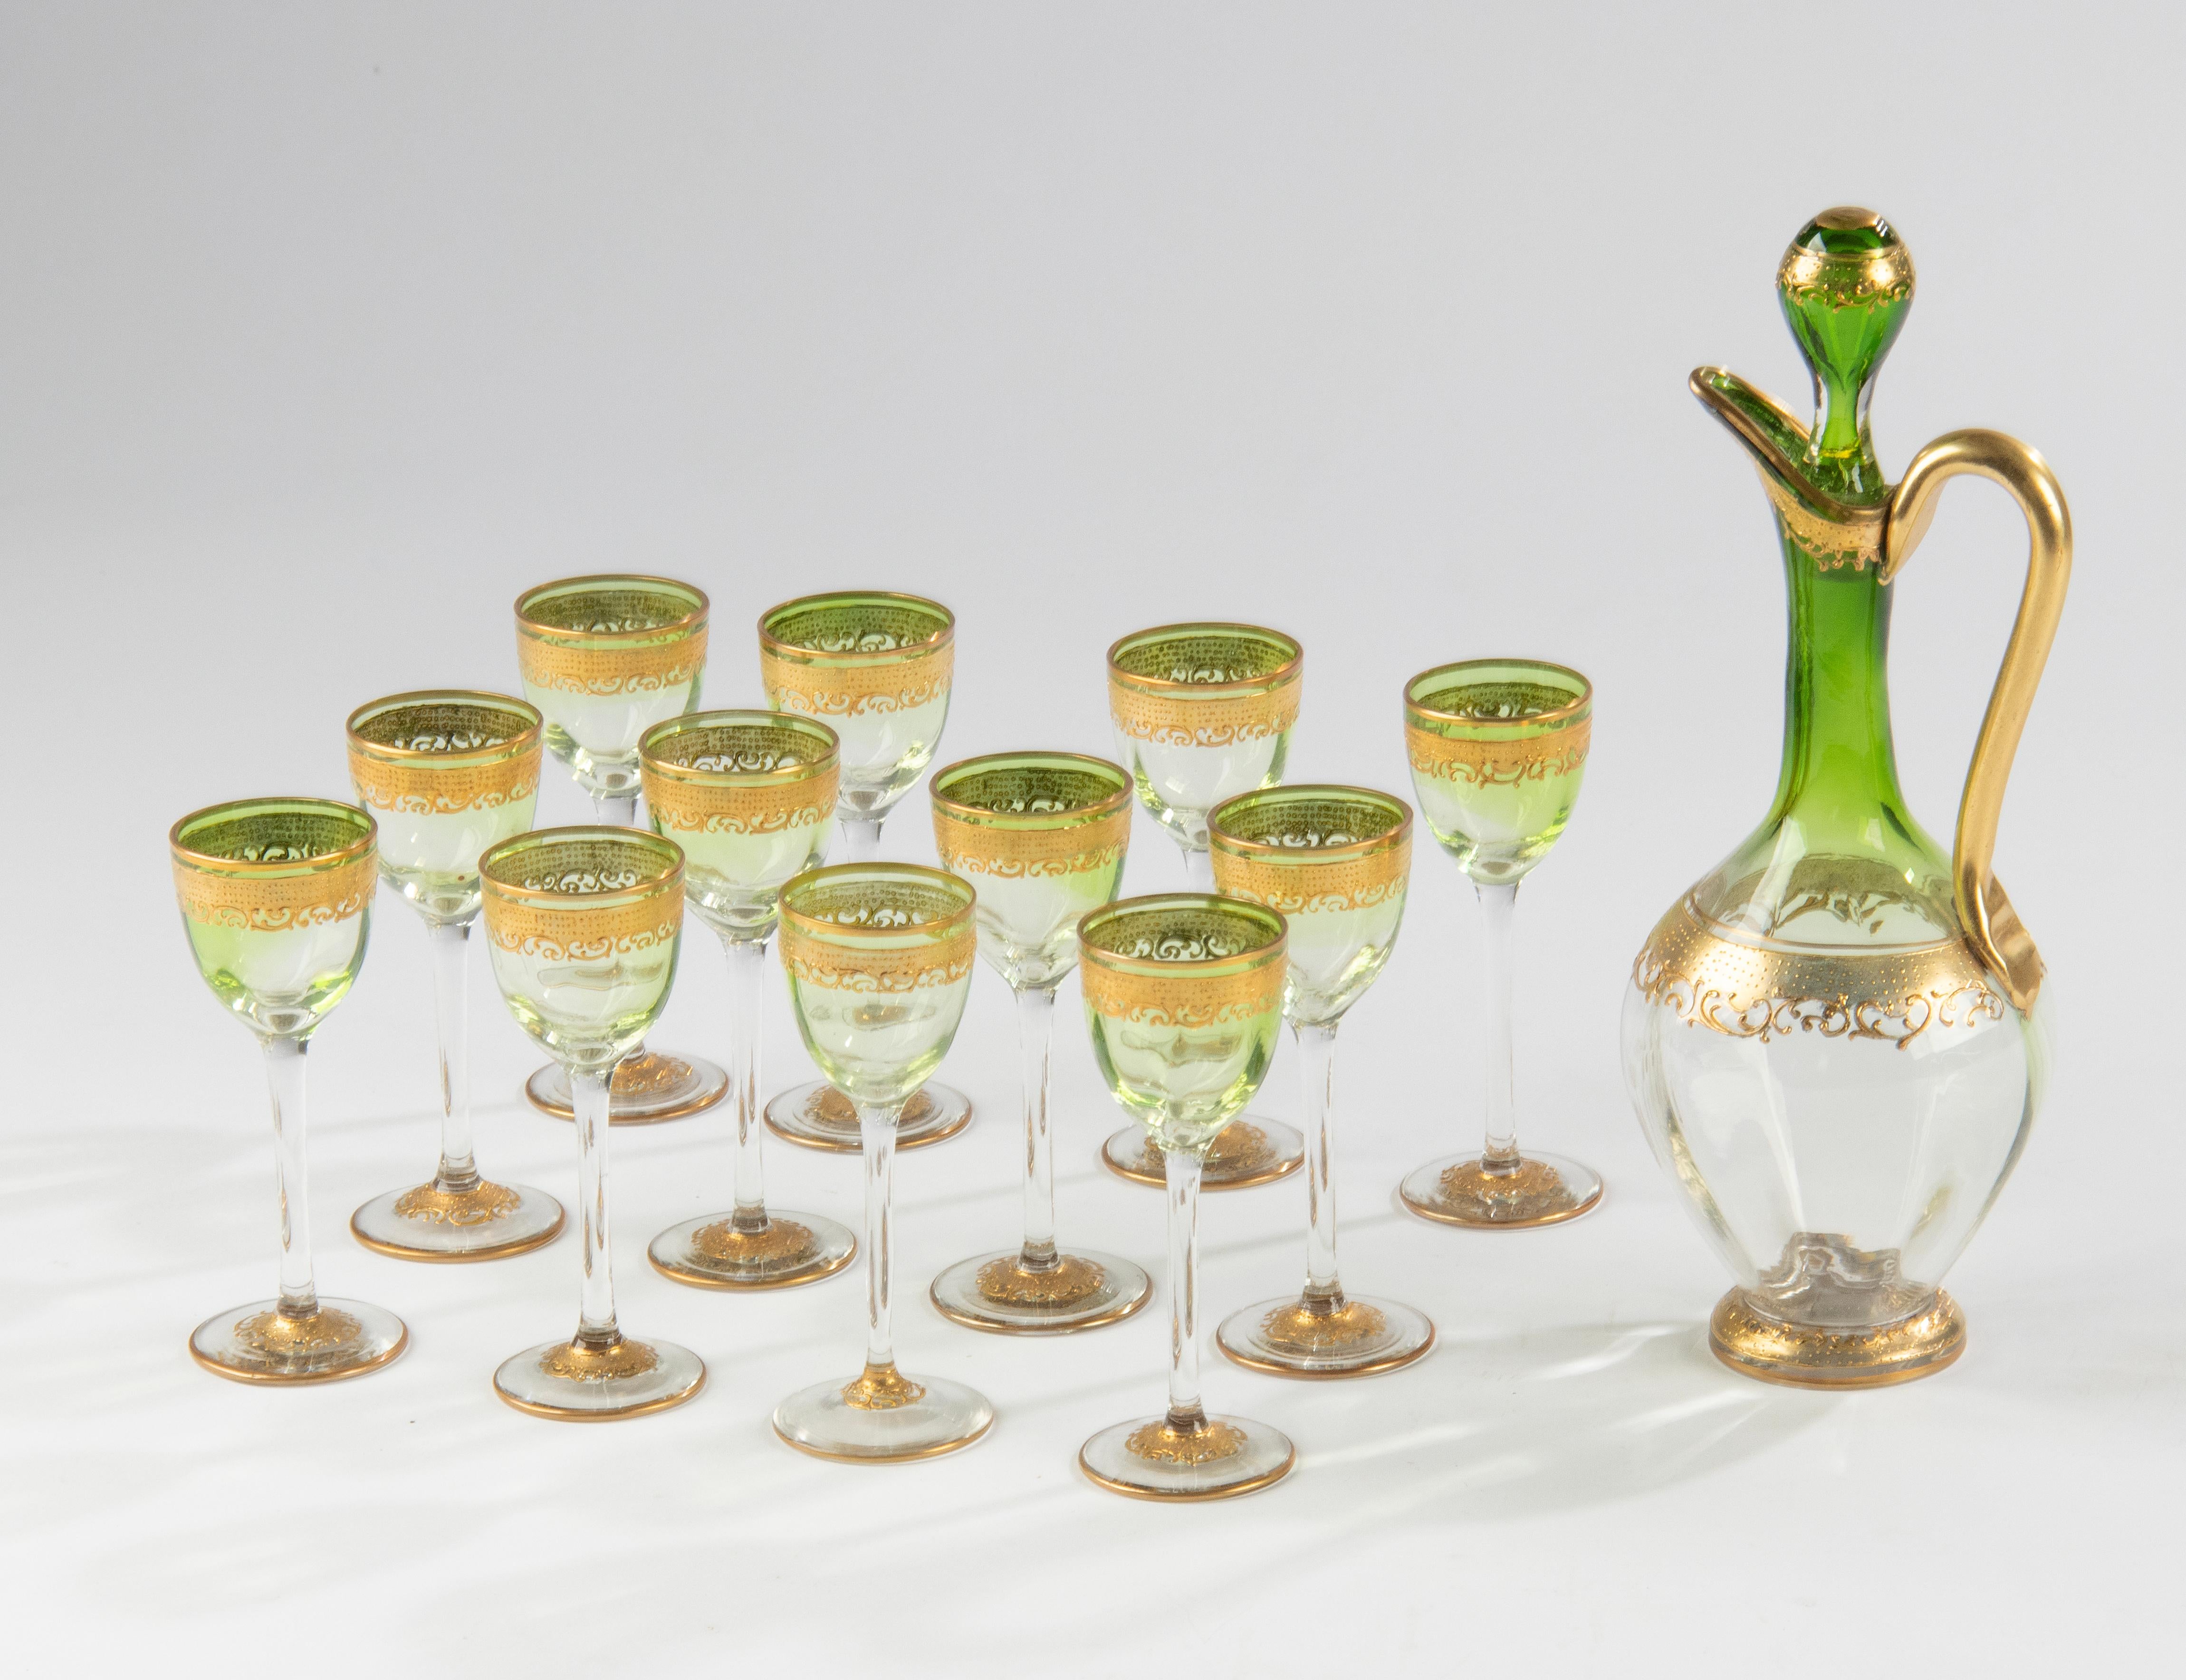 A lovely crystal liquor set, made by the famous brand Moser Karlsbad. 
The glasses have a beautiful green gradient colour and gold colored accents. The matching decanter makes this set extra special. 
Dimensions: the decanter is 24 cm tall and Ø8